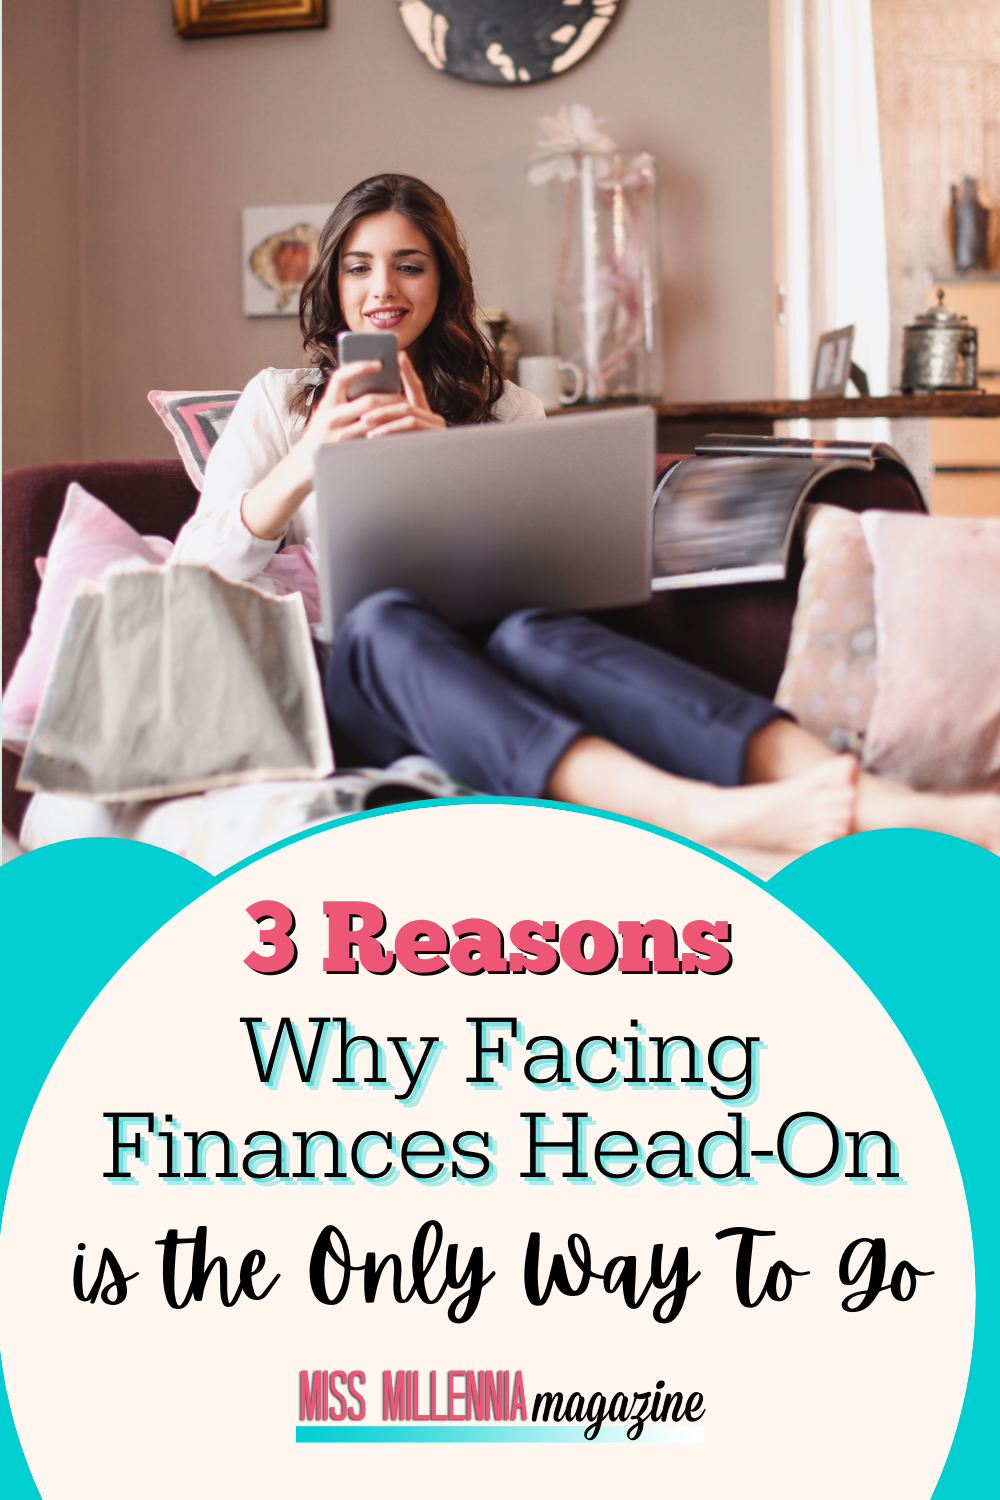 3 Reasons Why Facing Finances Head-On is the Only Way To Go